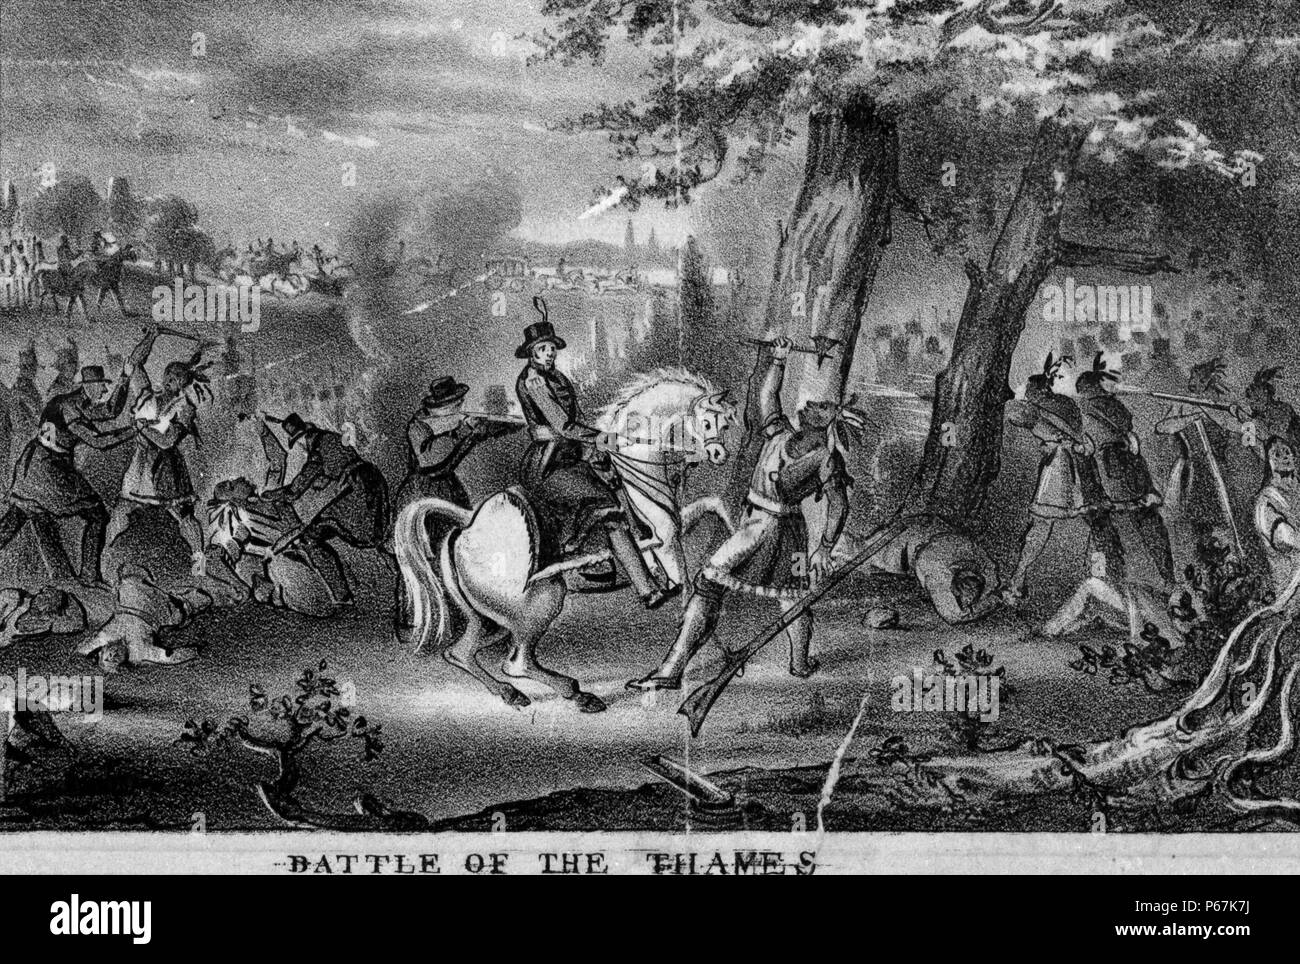 Battle of the Thames, also called Battle of Moravian town , (Oct. 5, 1813), in the War of 1812, decisive U.S. victory over British and Indian forces in Ontario, Canada, enabling the United States to consolidate its control over the Northwest Stock Photo